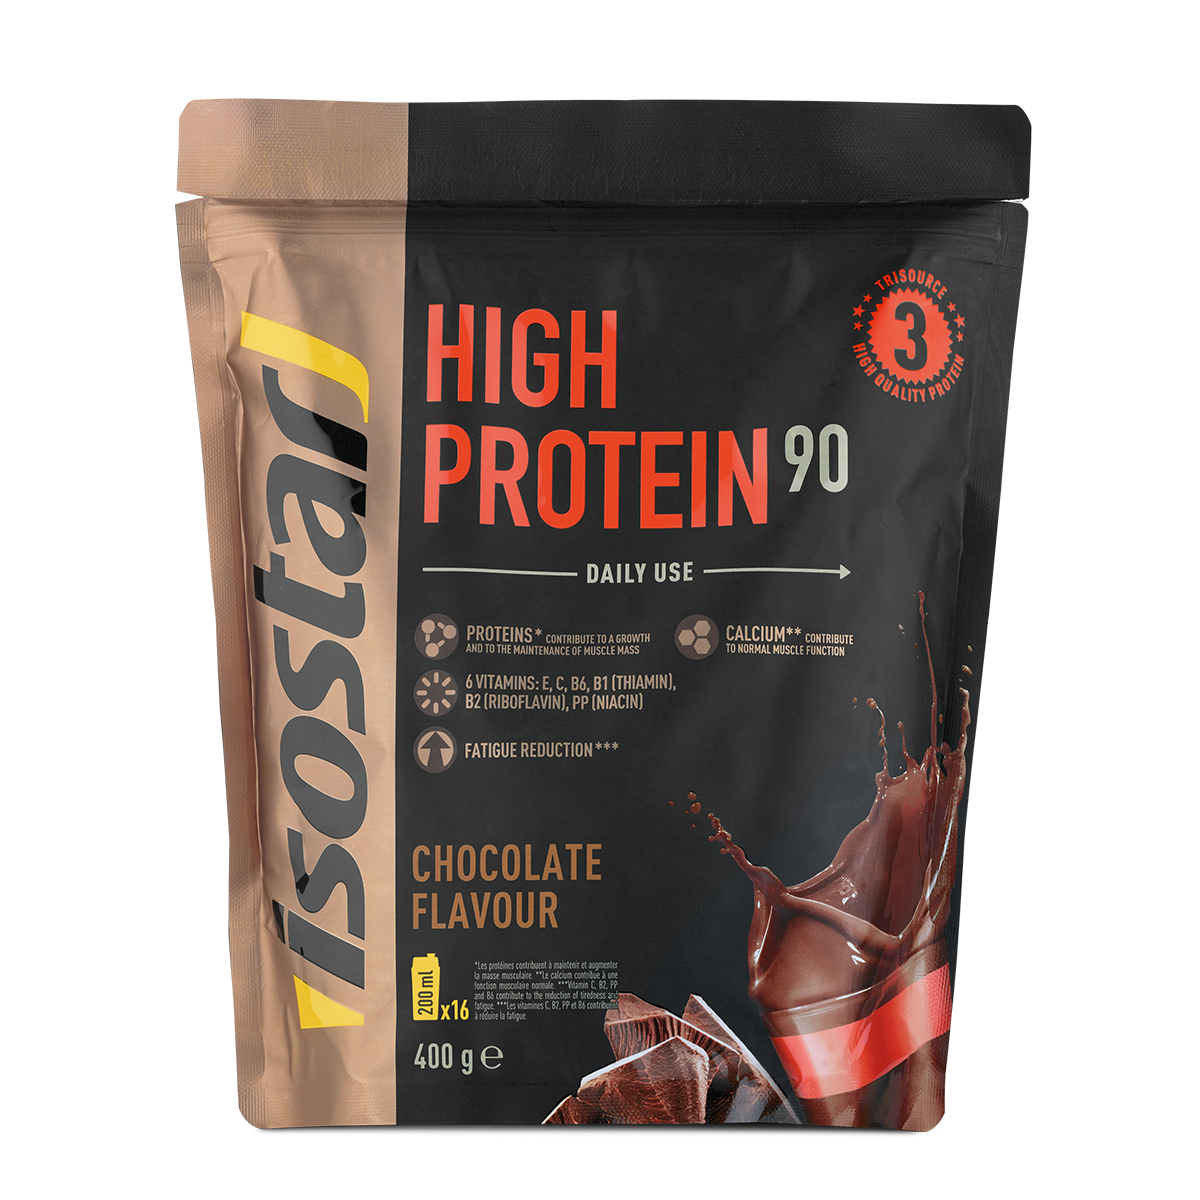  Isostar High Protein Chocolat - poudre proteinée